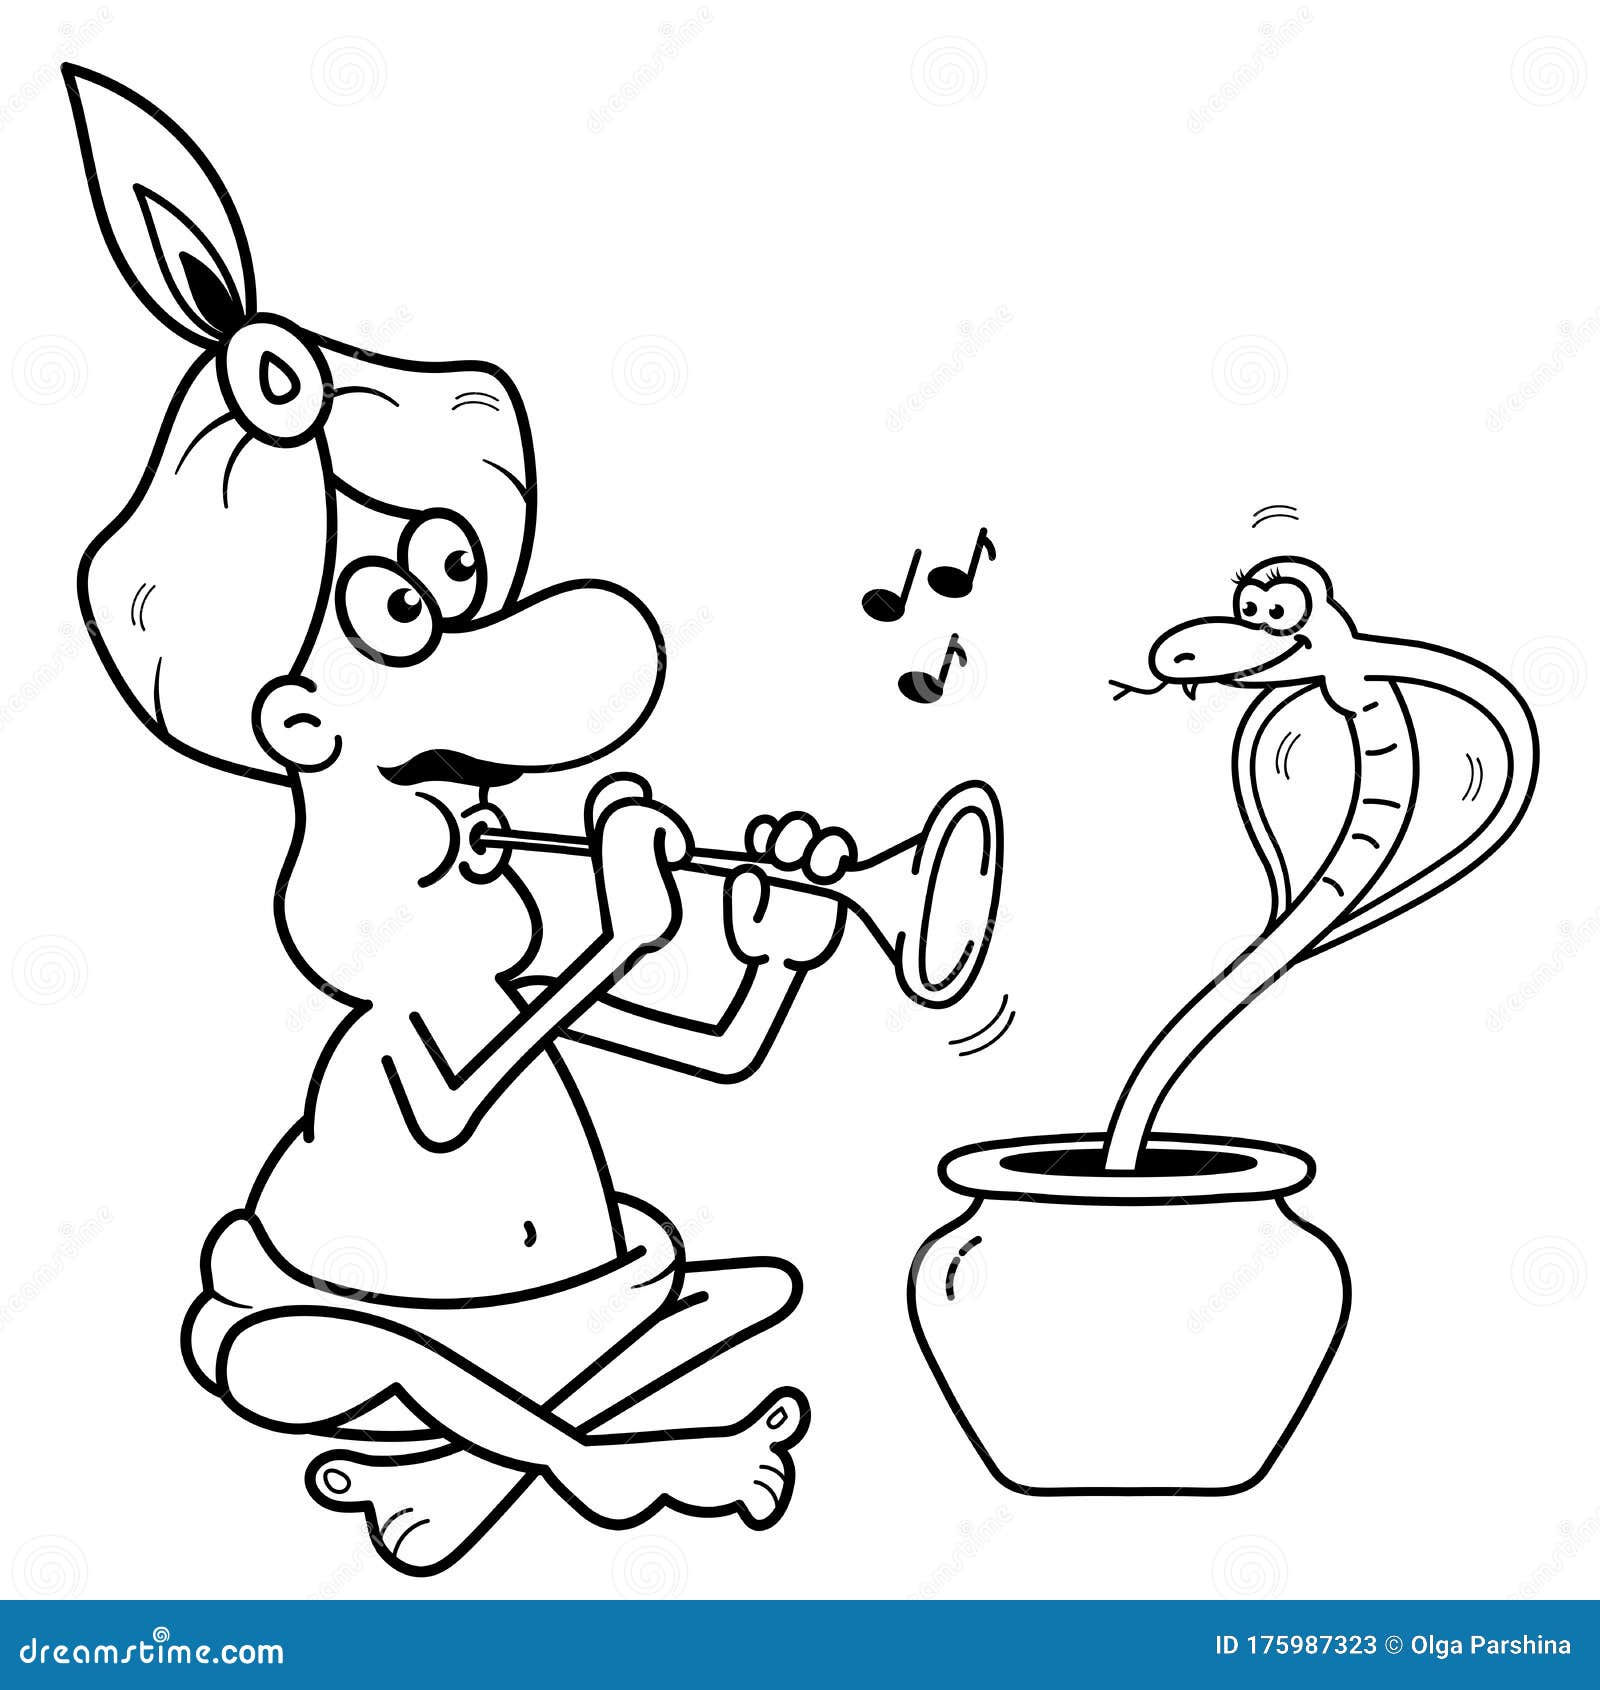 coloring page outline of cartoon fakir or snake charmer with serpent. coloring book for kids